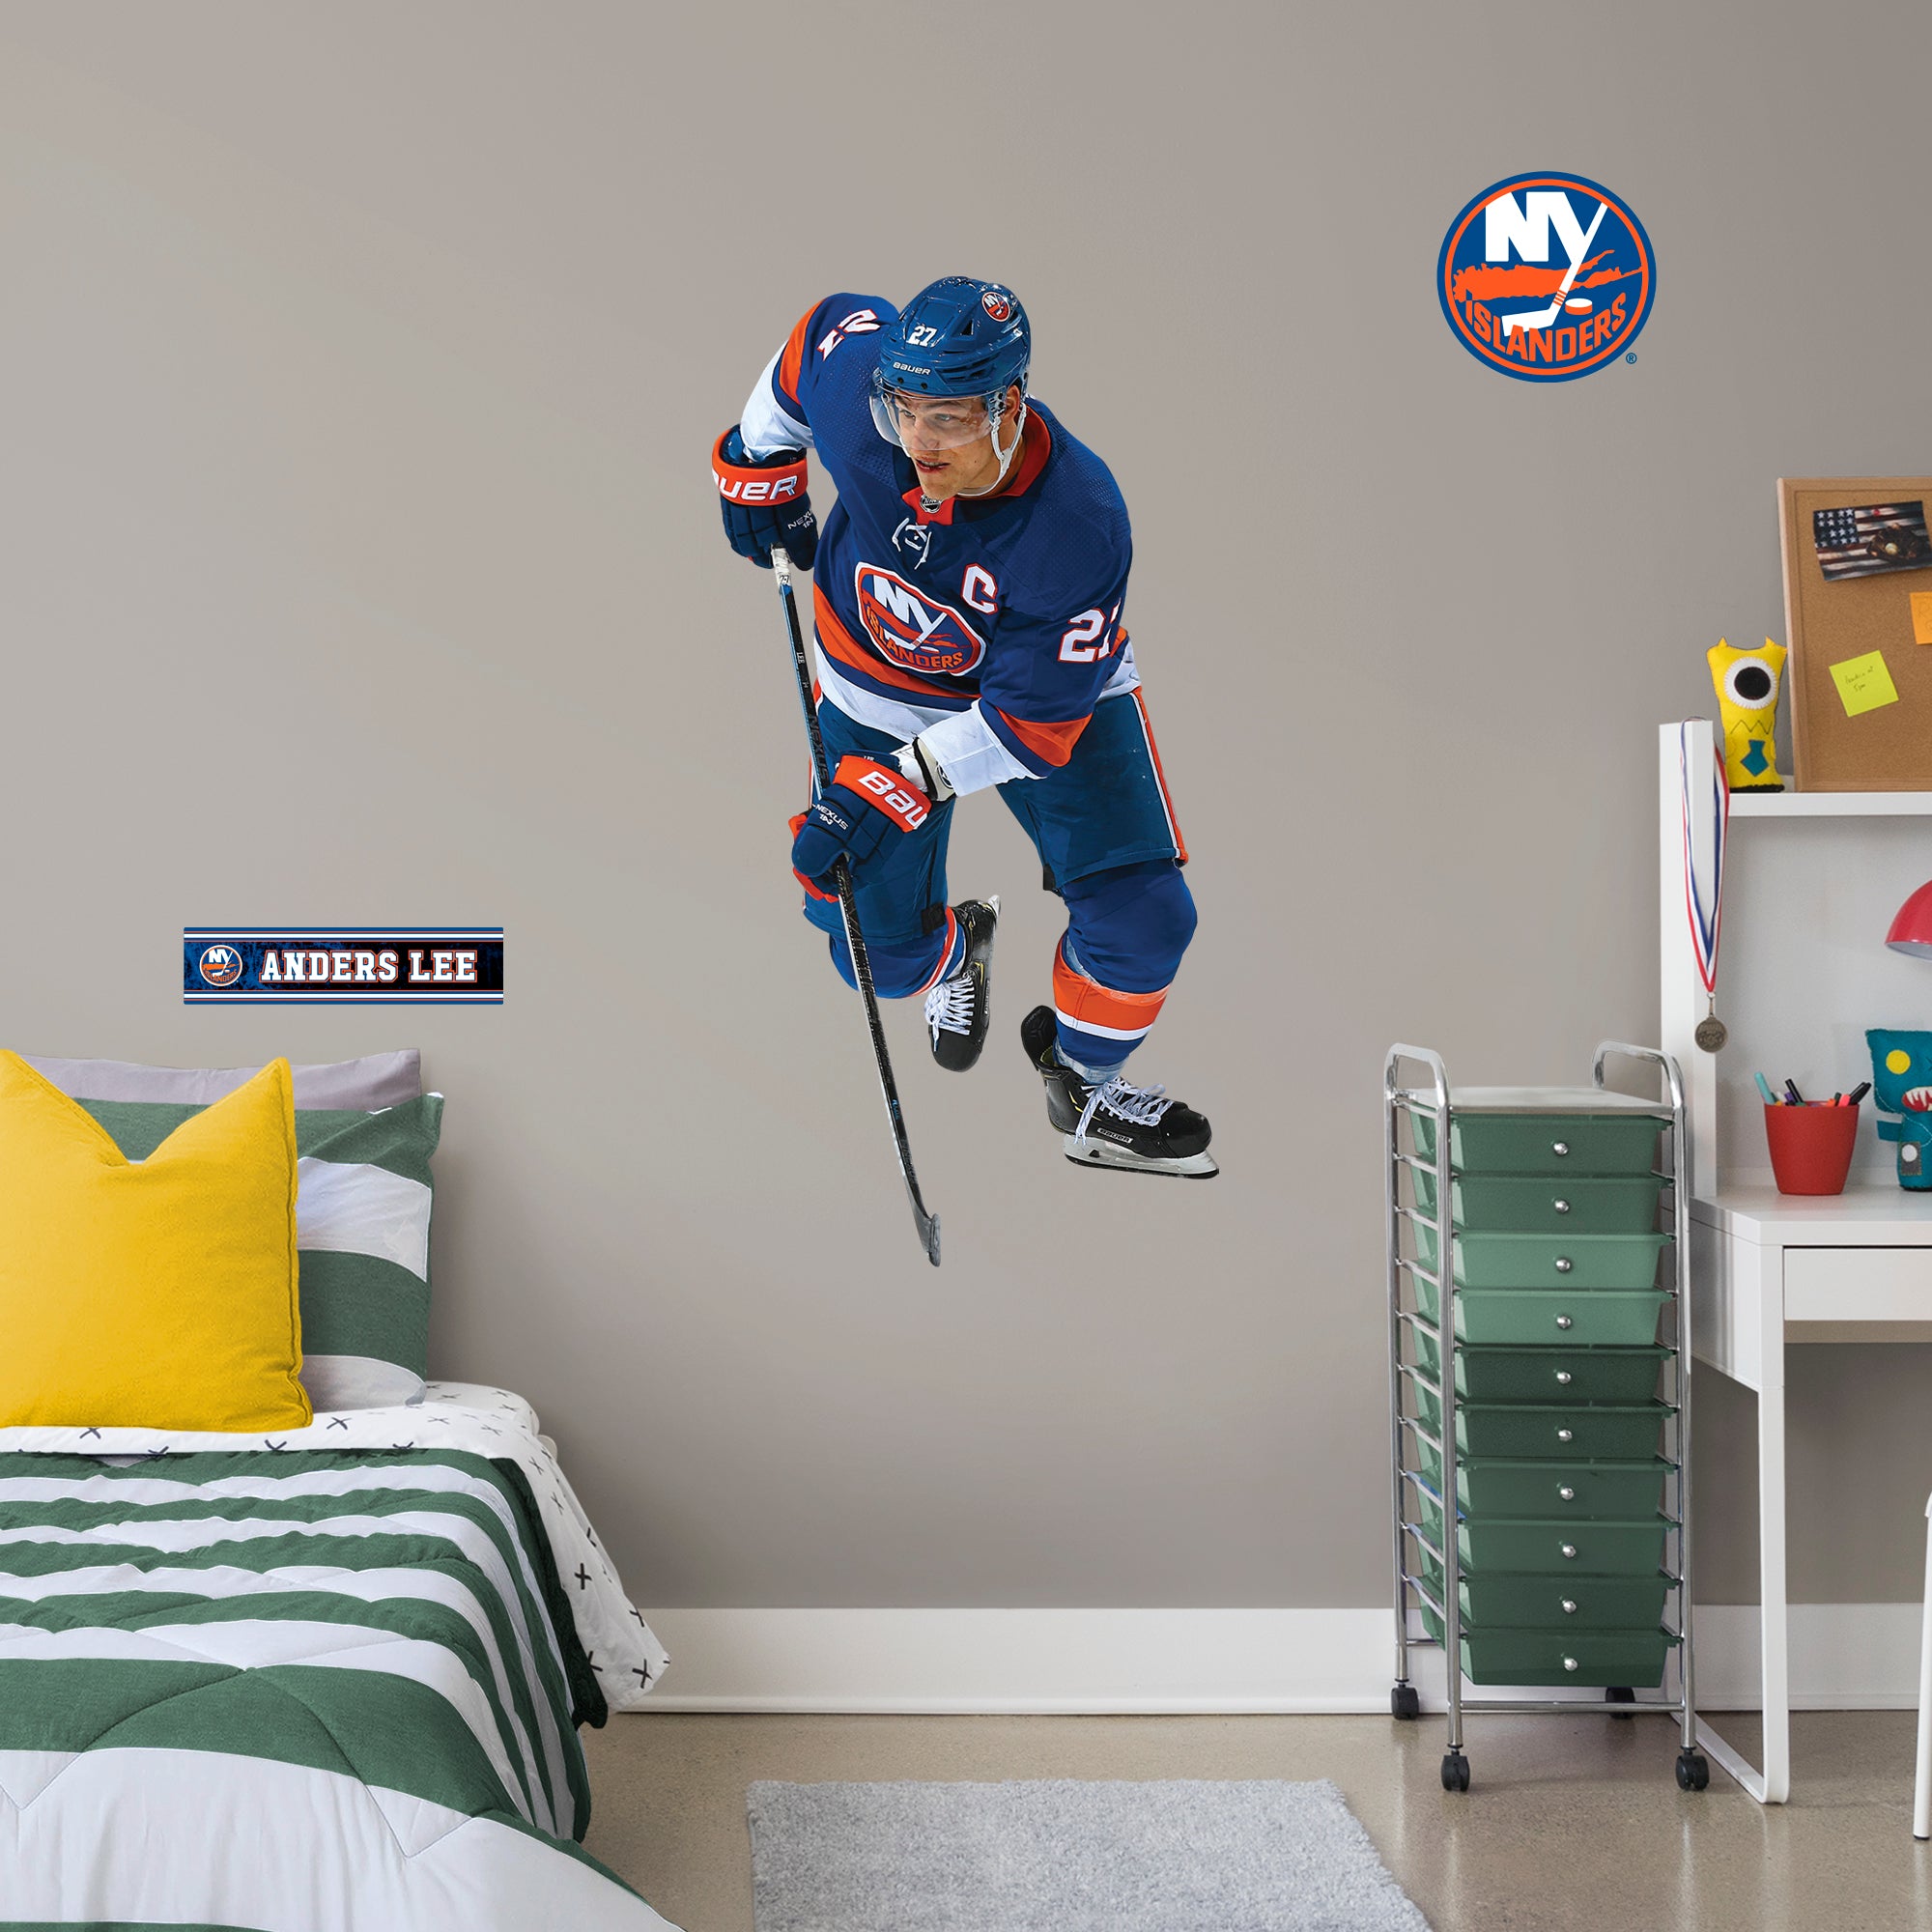 Anders Lee for New York Islanders: RealBig Officially Licensed NHL Removable Wall Decal Giant Athlete + 2 Decals (26"W x 51"H) b